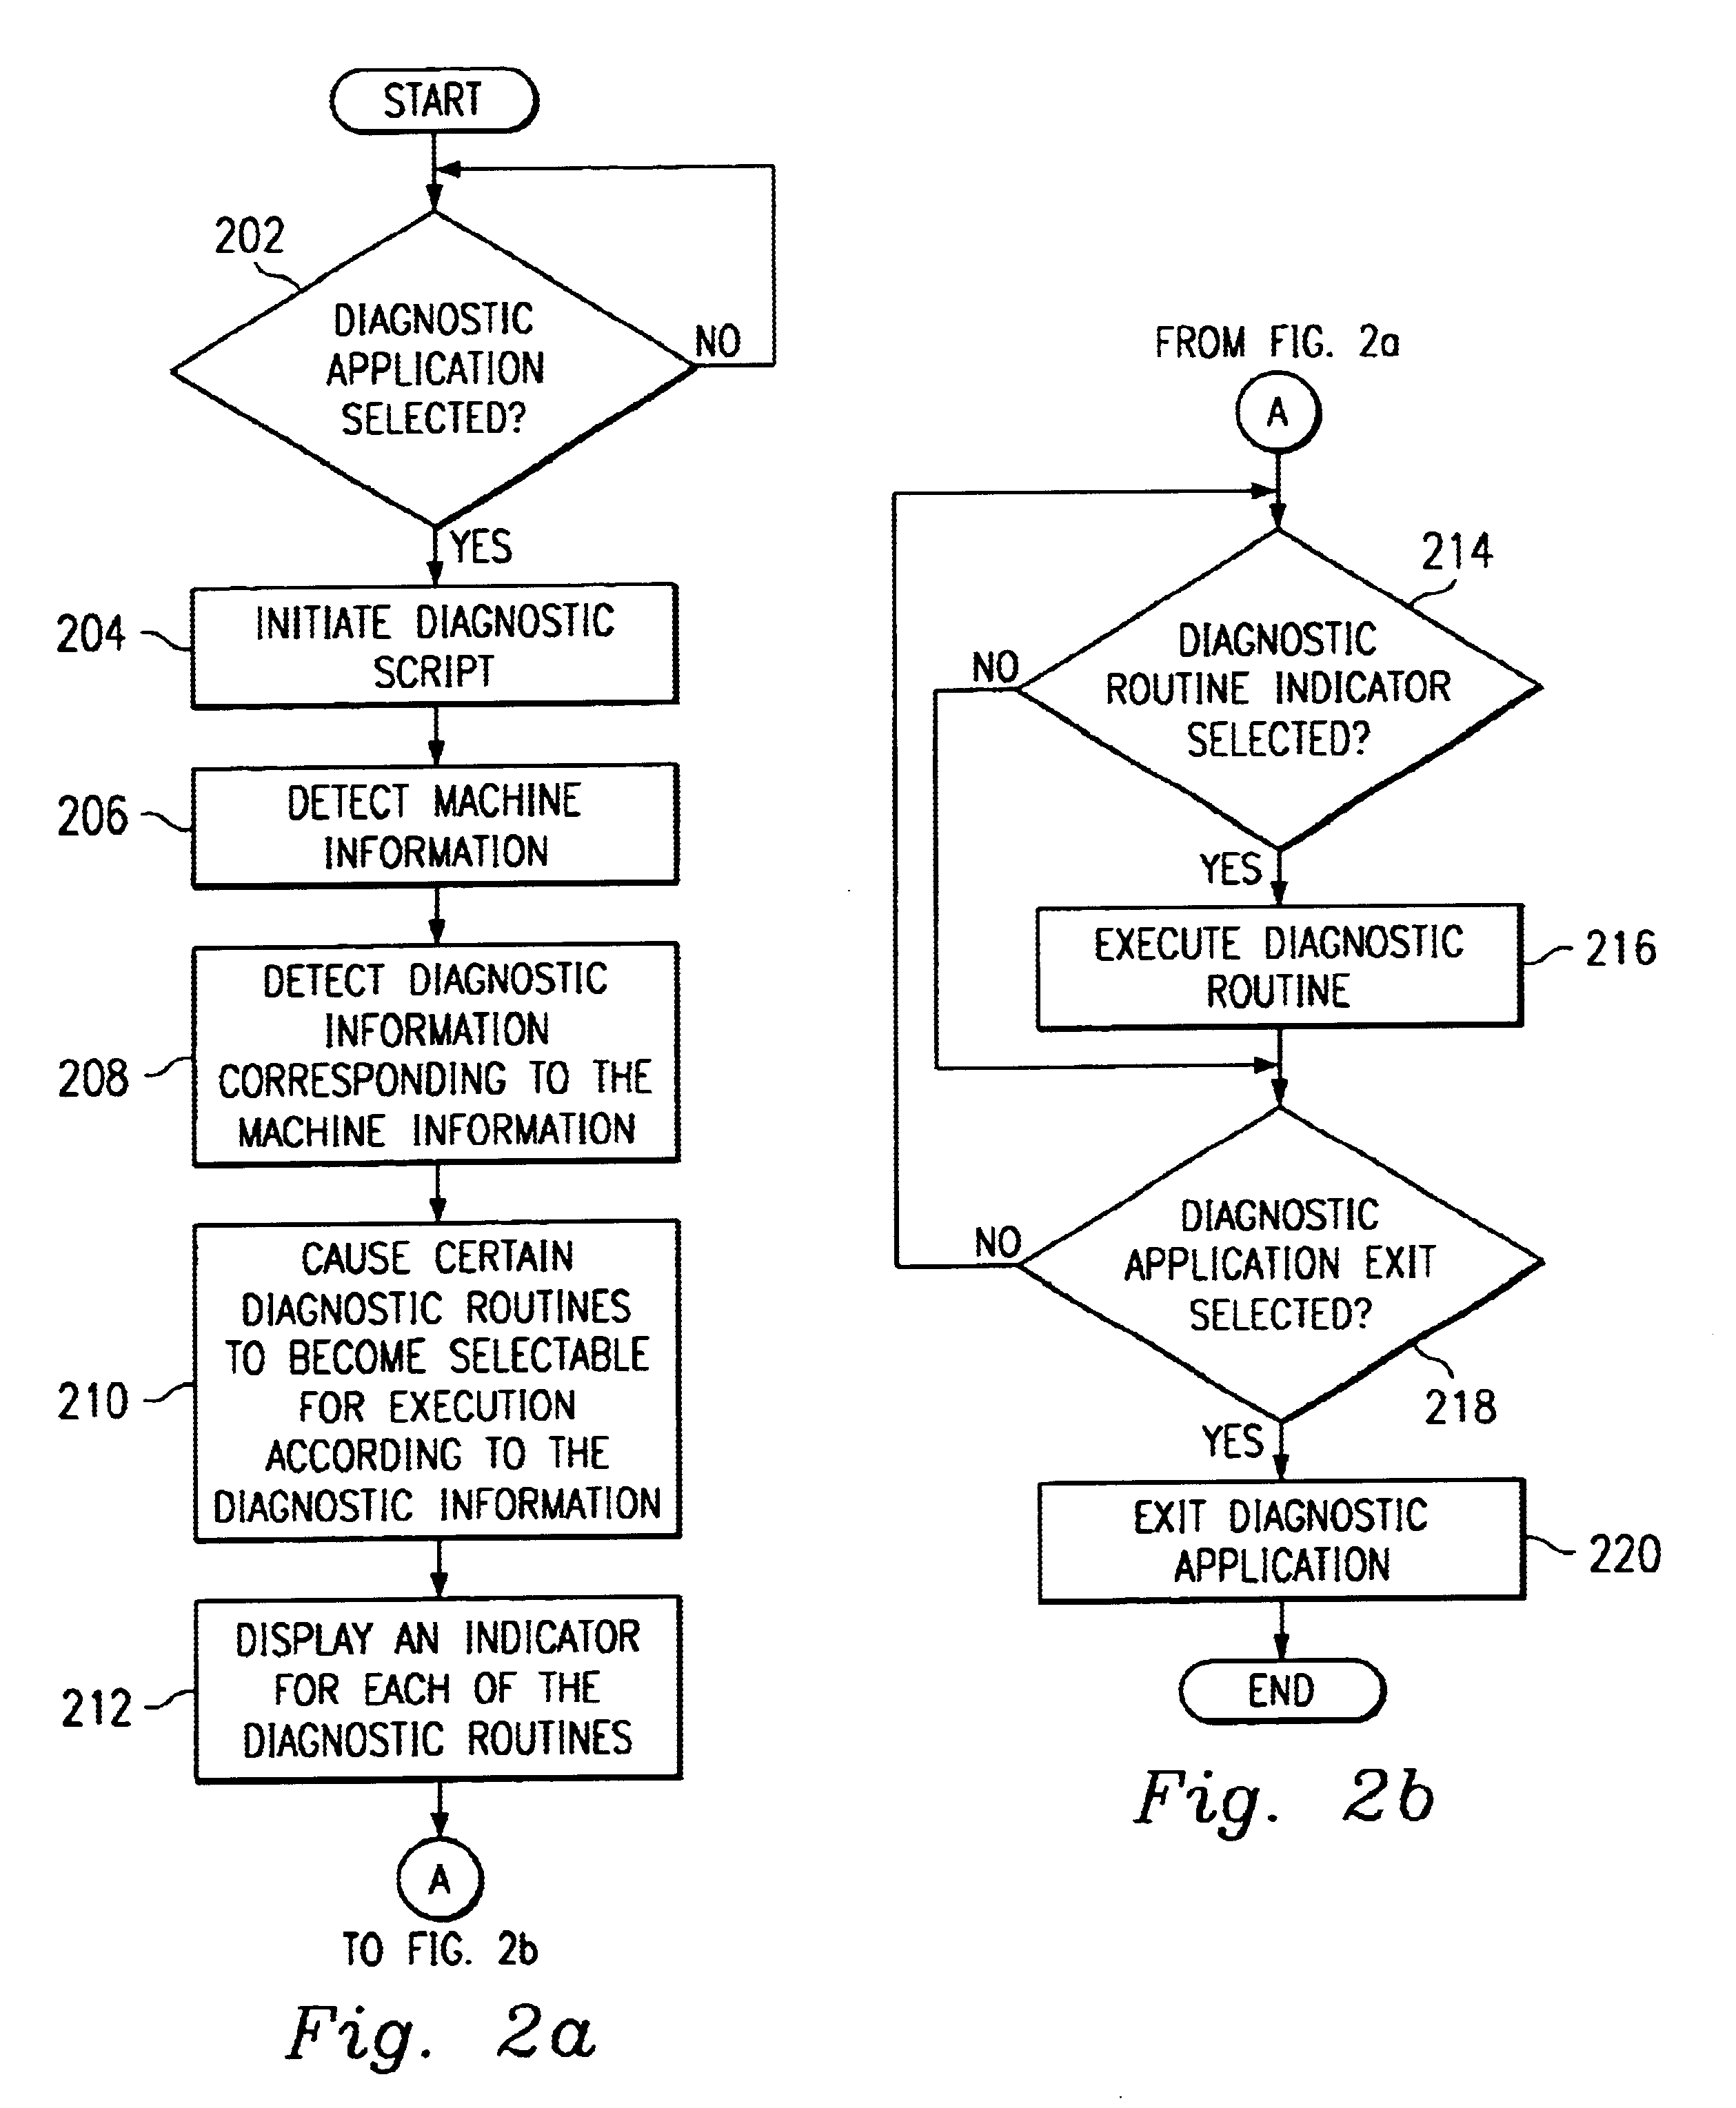 System and method for identifying executable diagnostic routines using machine information and diagnostic information in a computer system